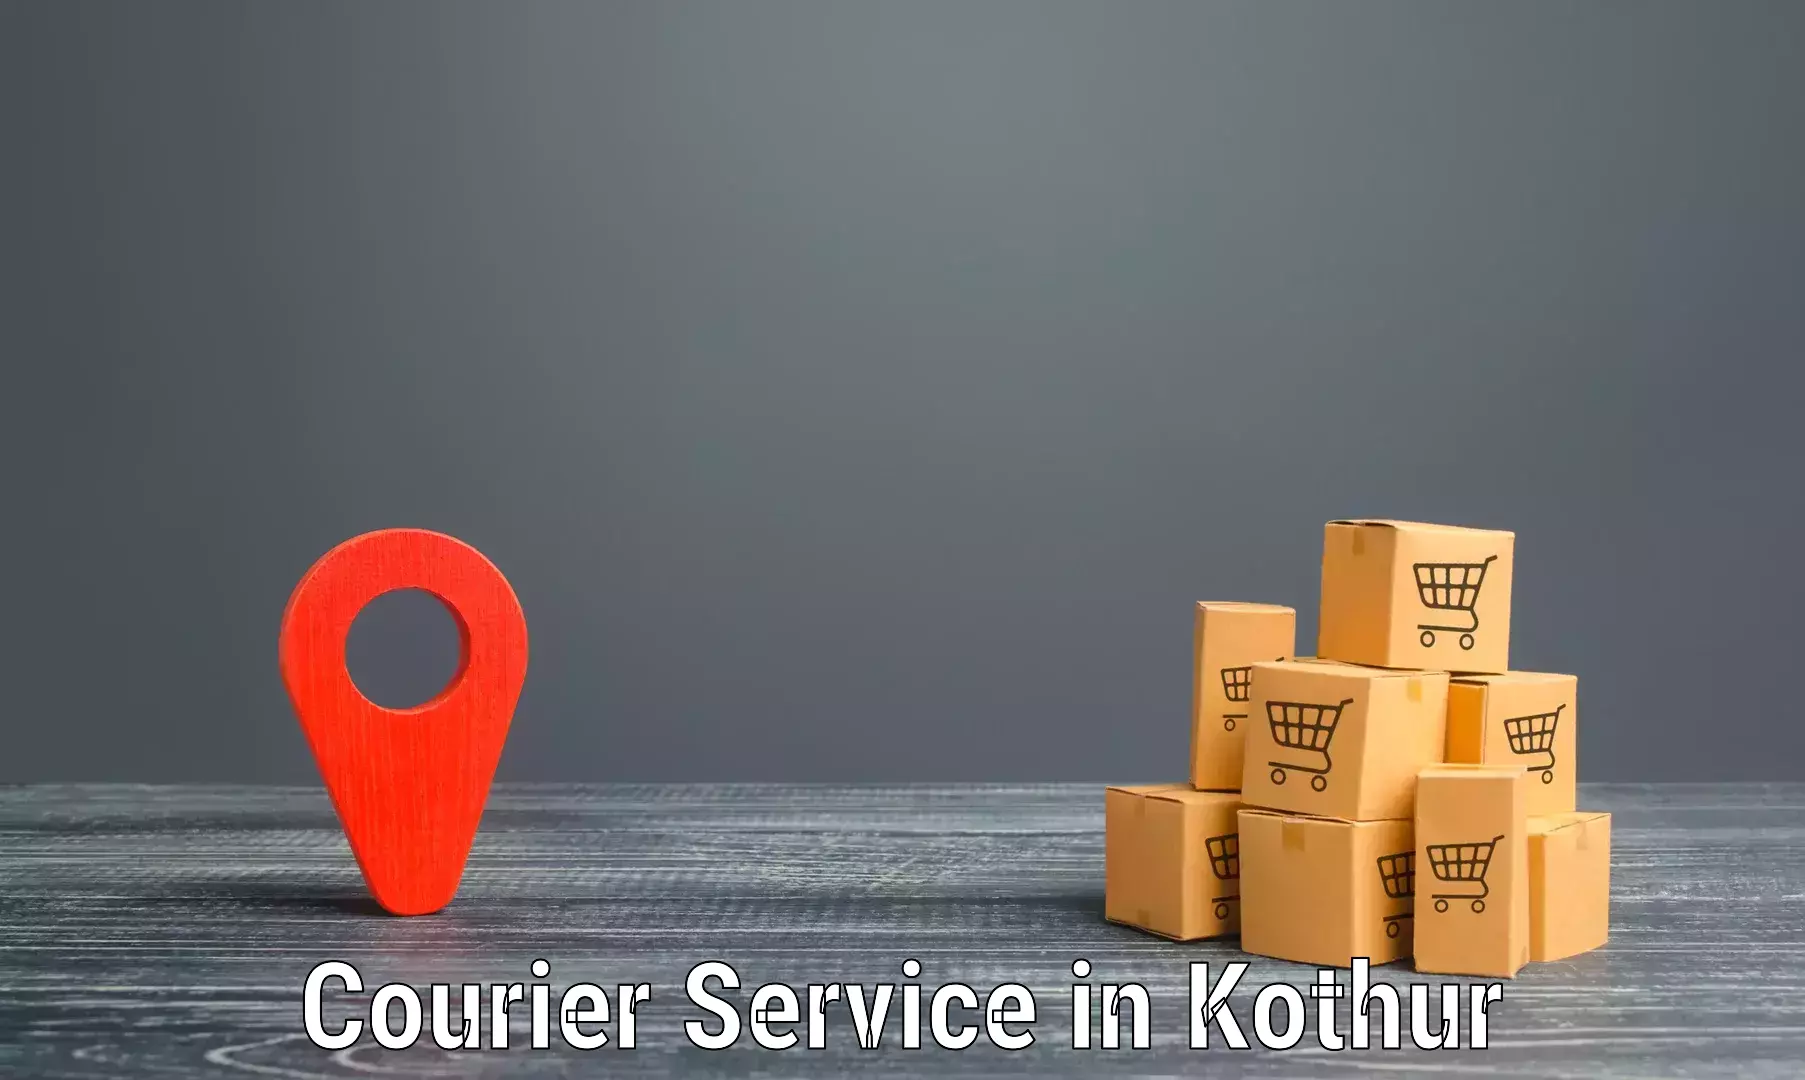 Same-day delivery solutions in Kothur